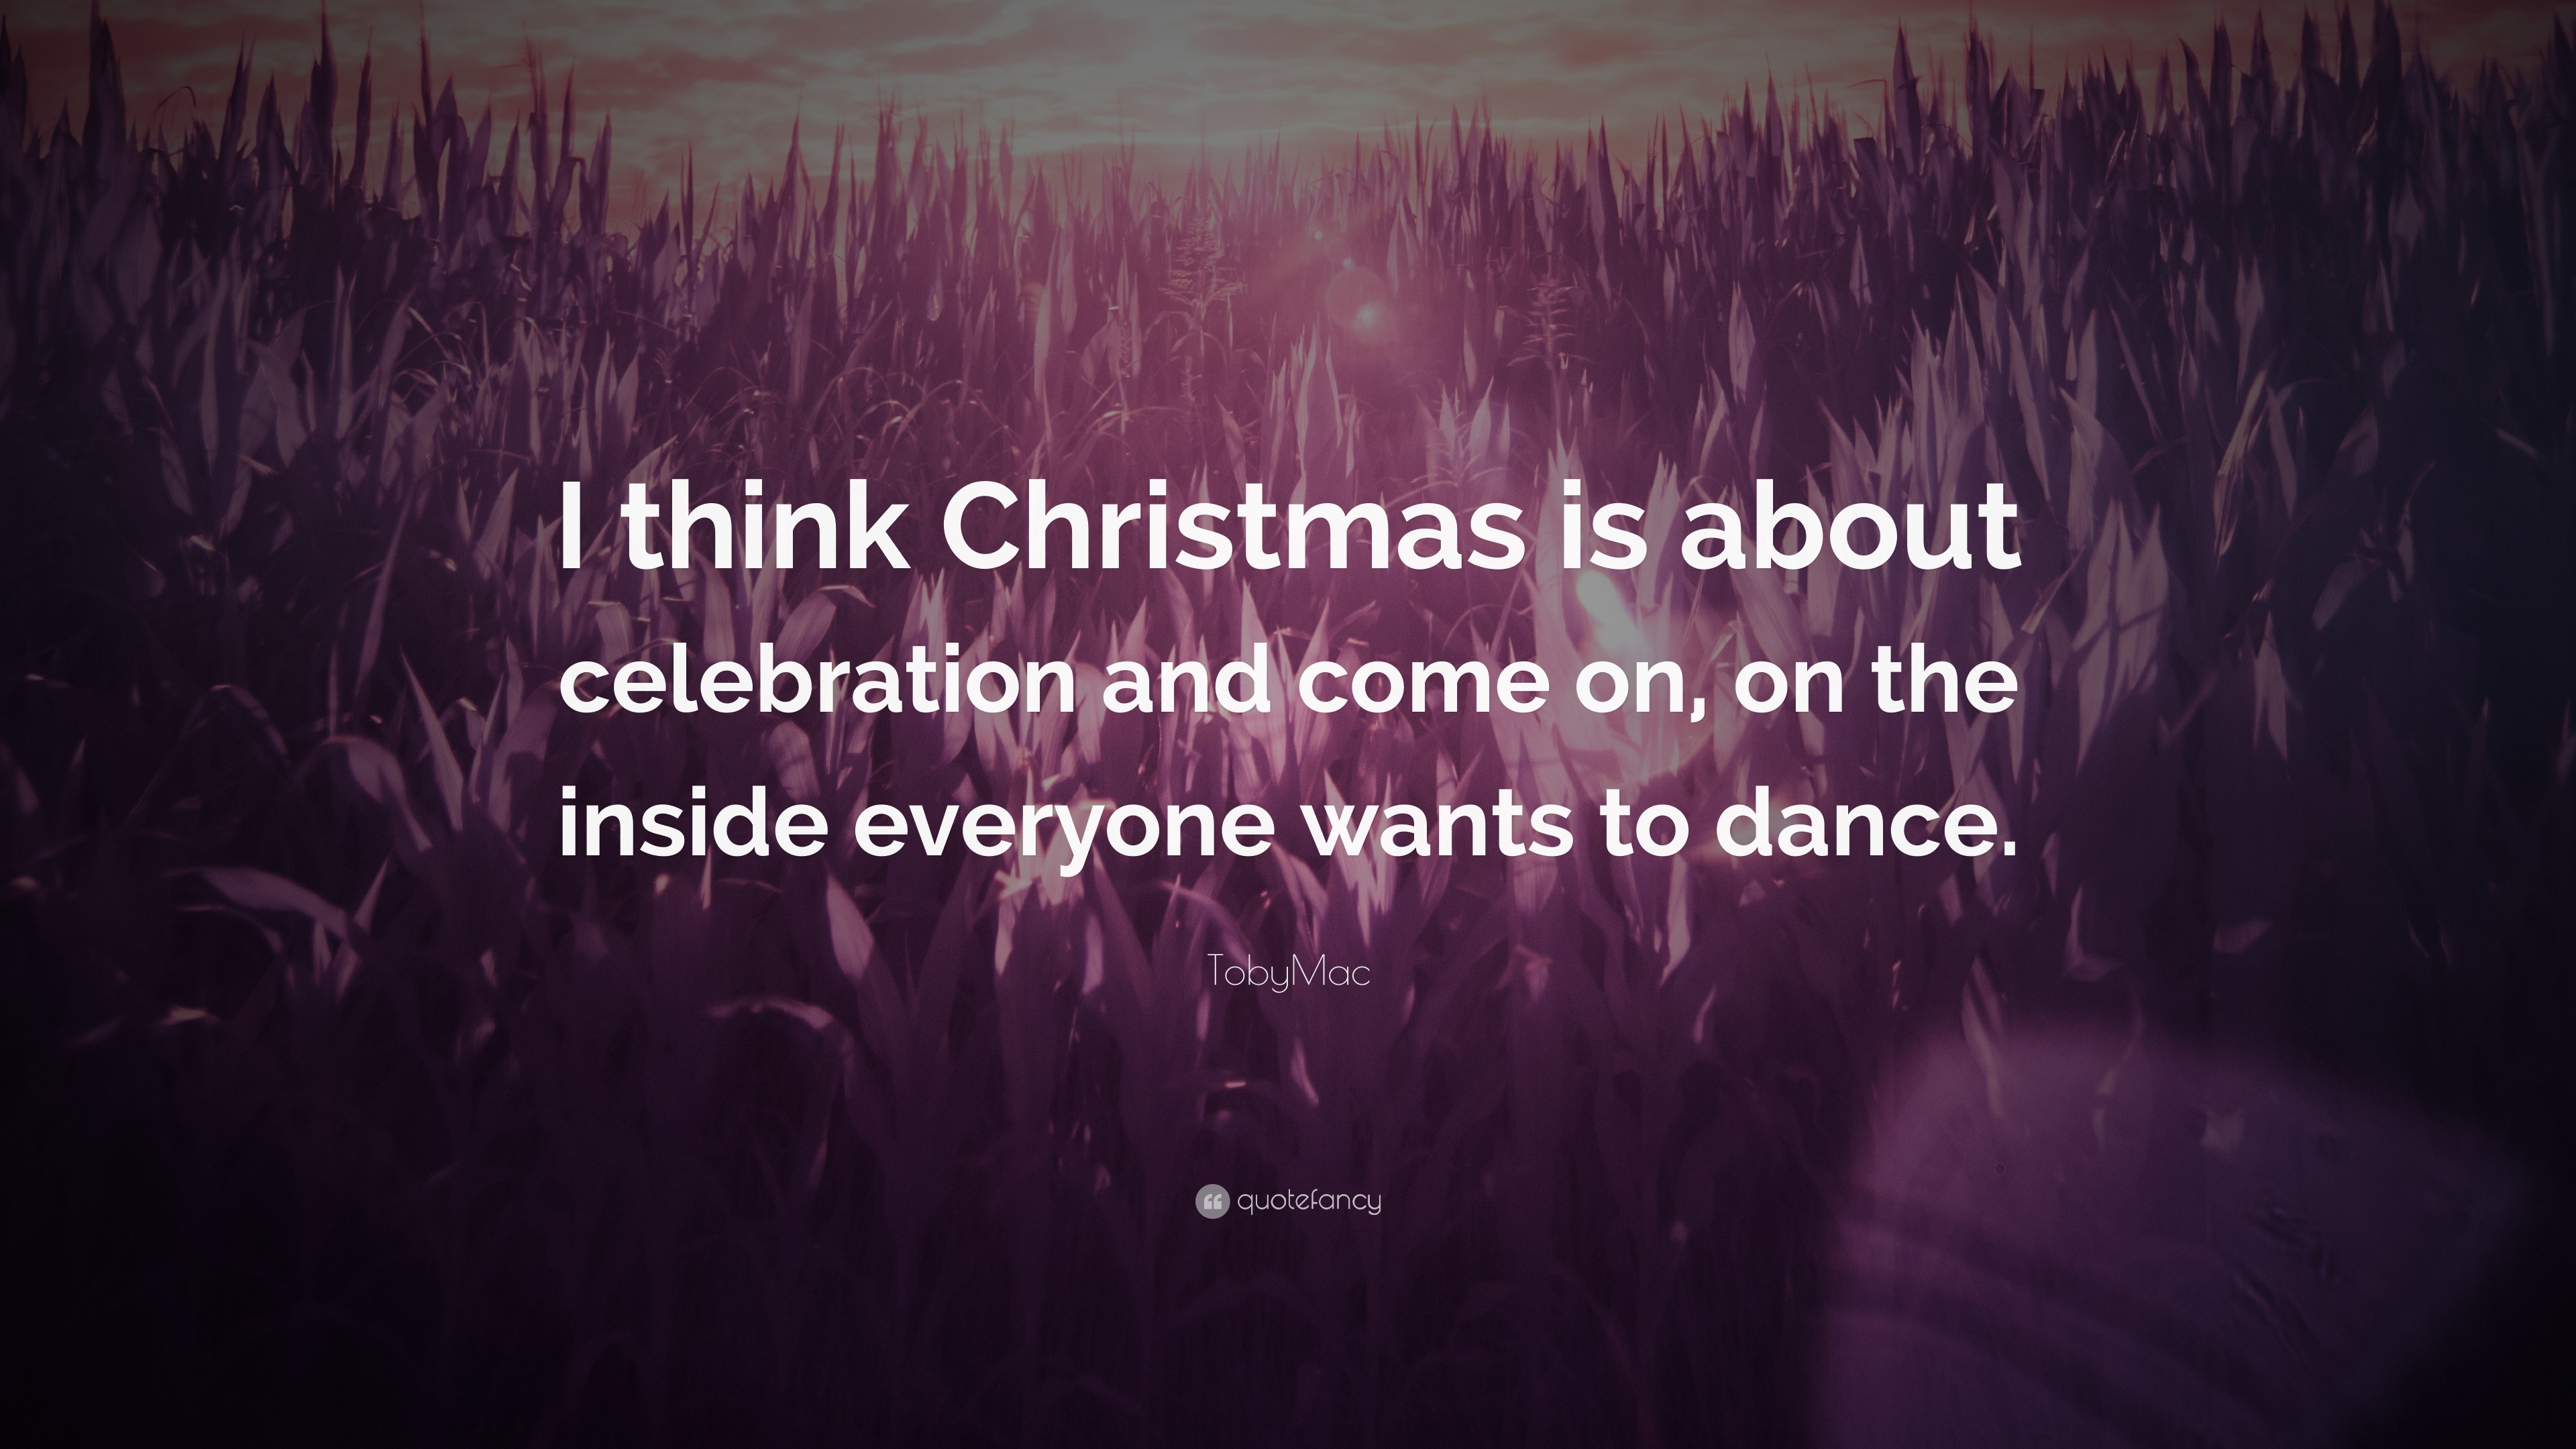 TobyMac Quote “I think Christmas is about celebration and come on, on